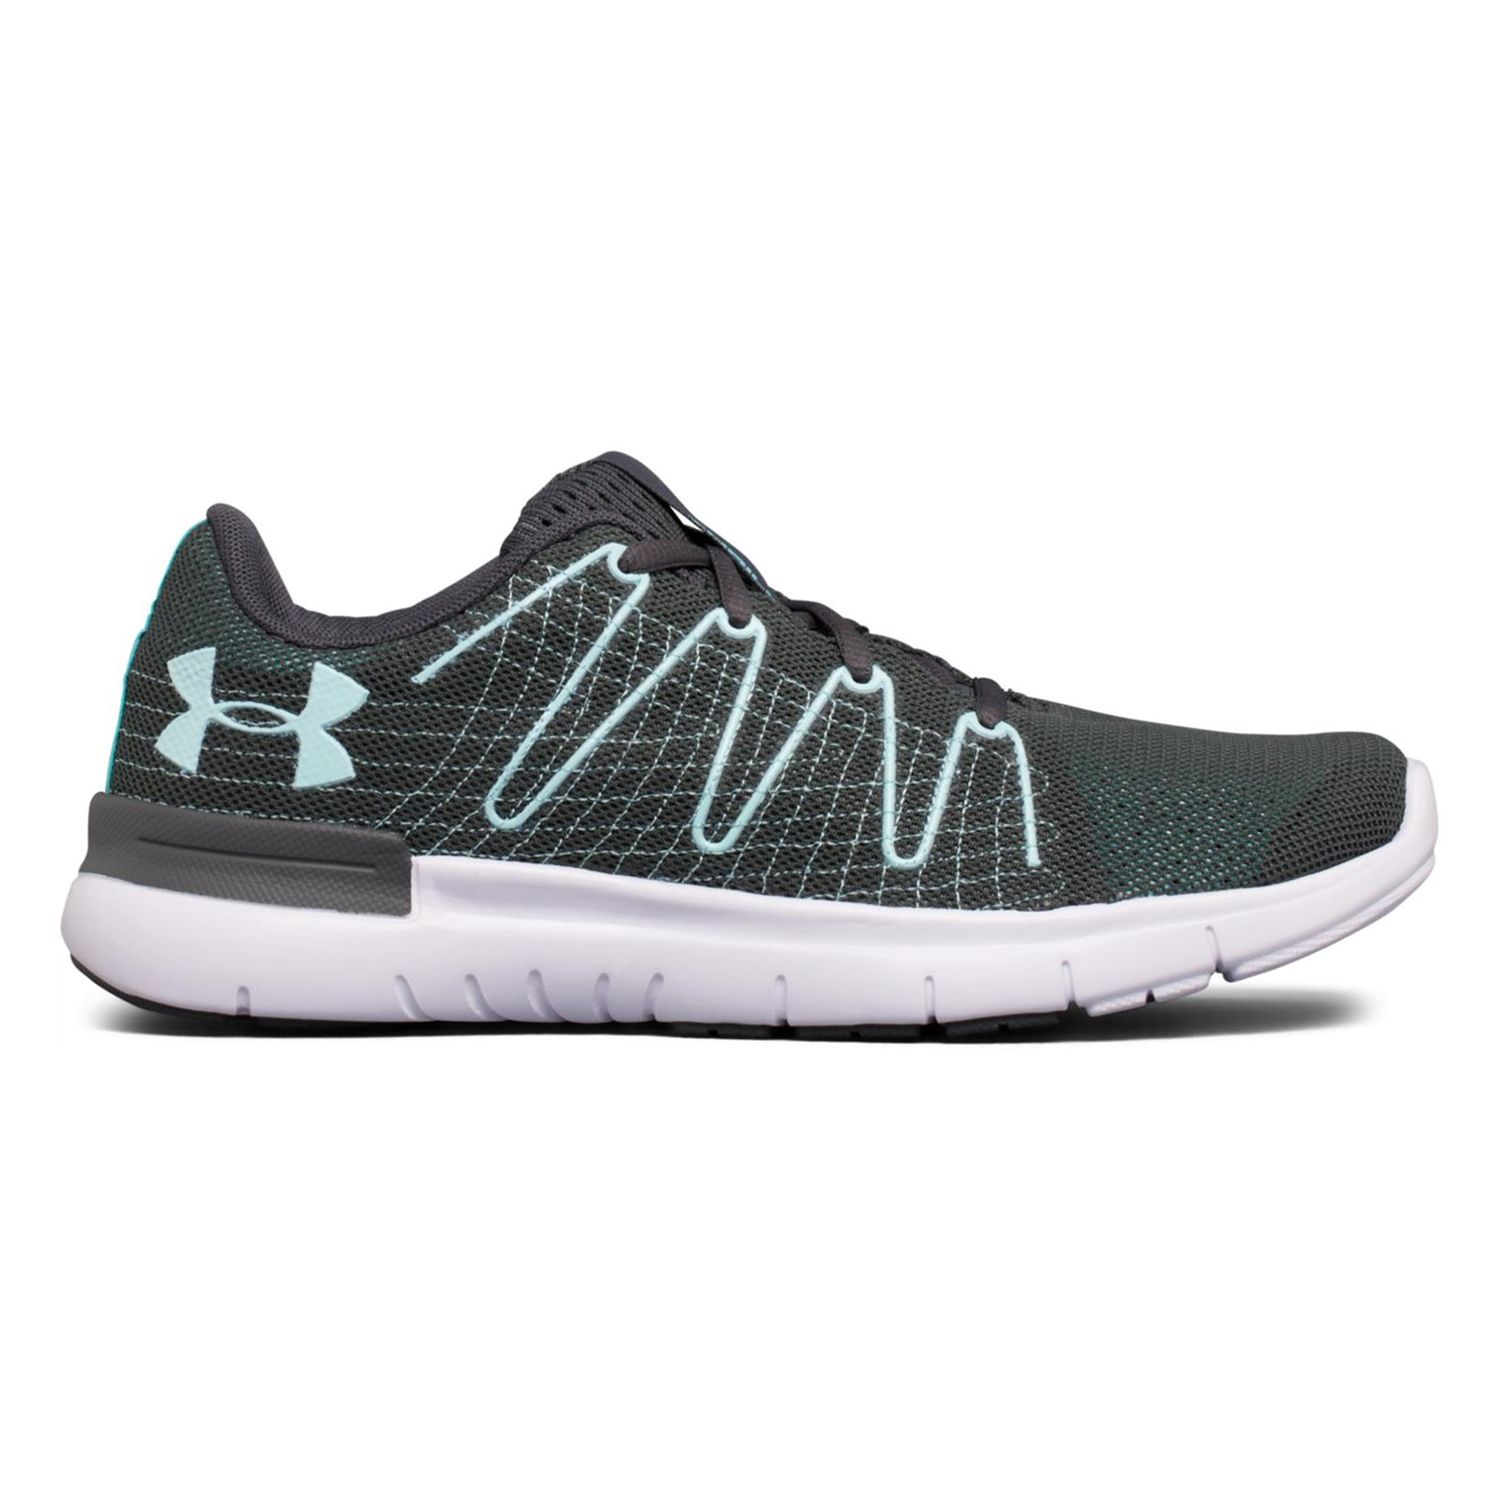 Under Armour Thrill 3 Women's Running Shoes